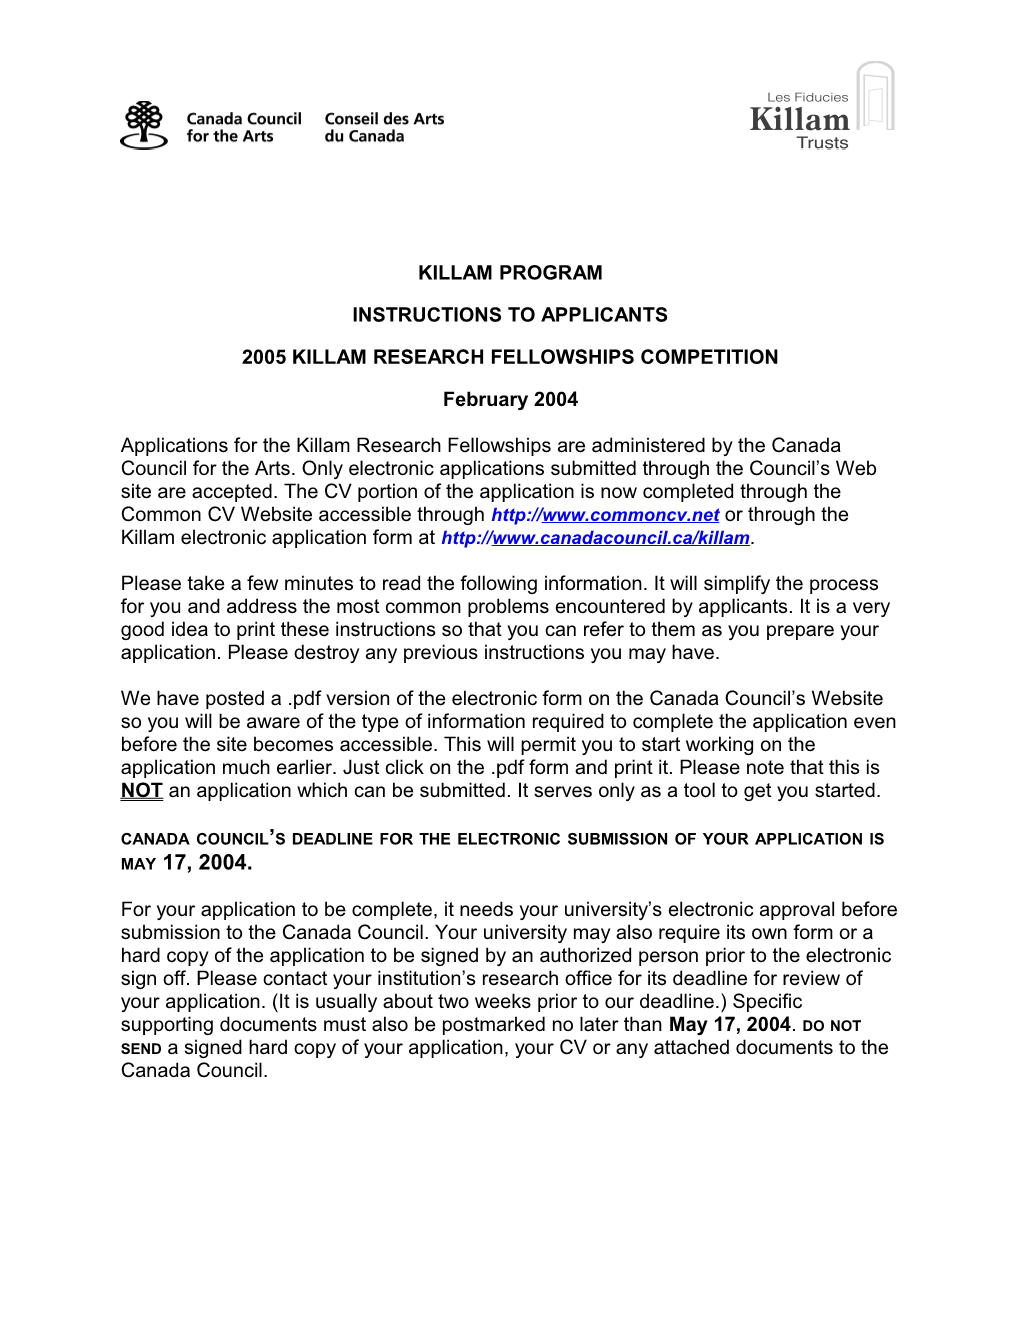 Welcome to the On-Line Application Form for a Killam Research Fellowship Administered By